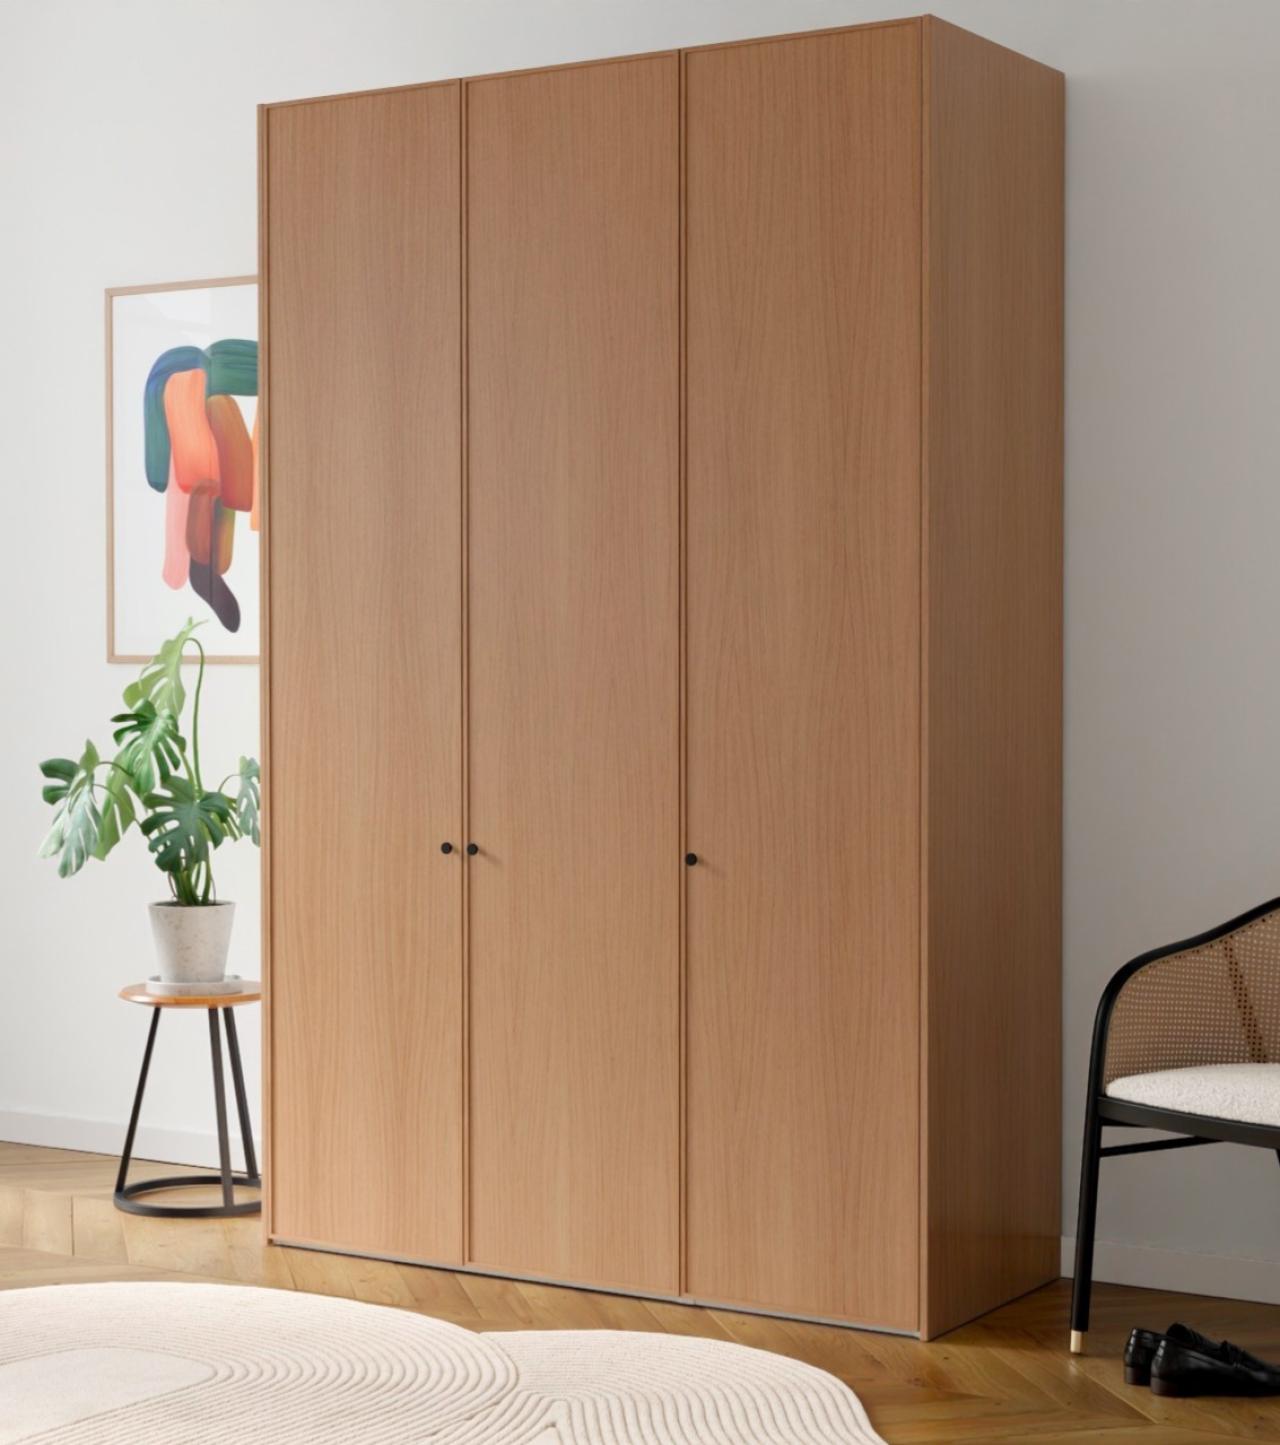 A Natural Oak wardrobe with Edge fronts